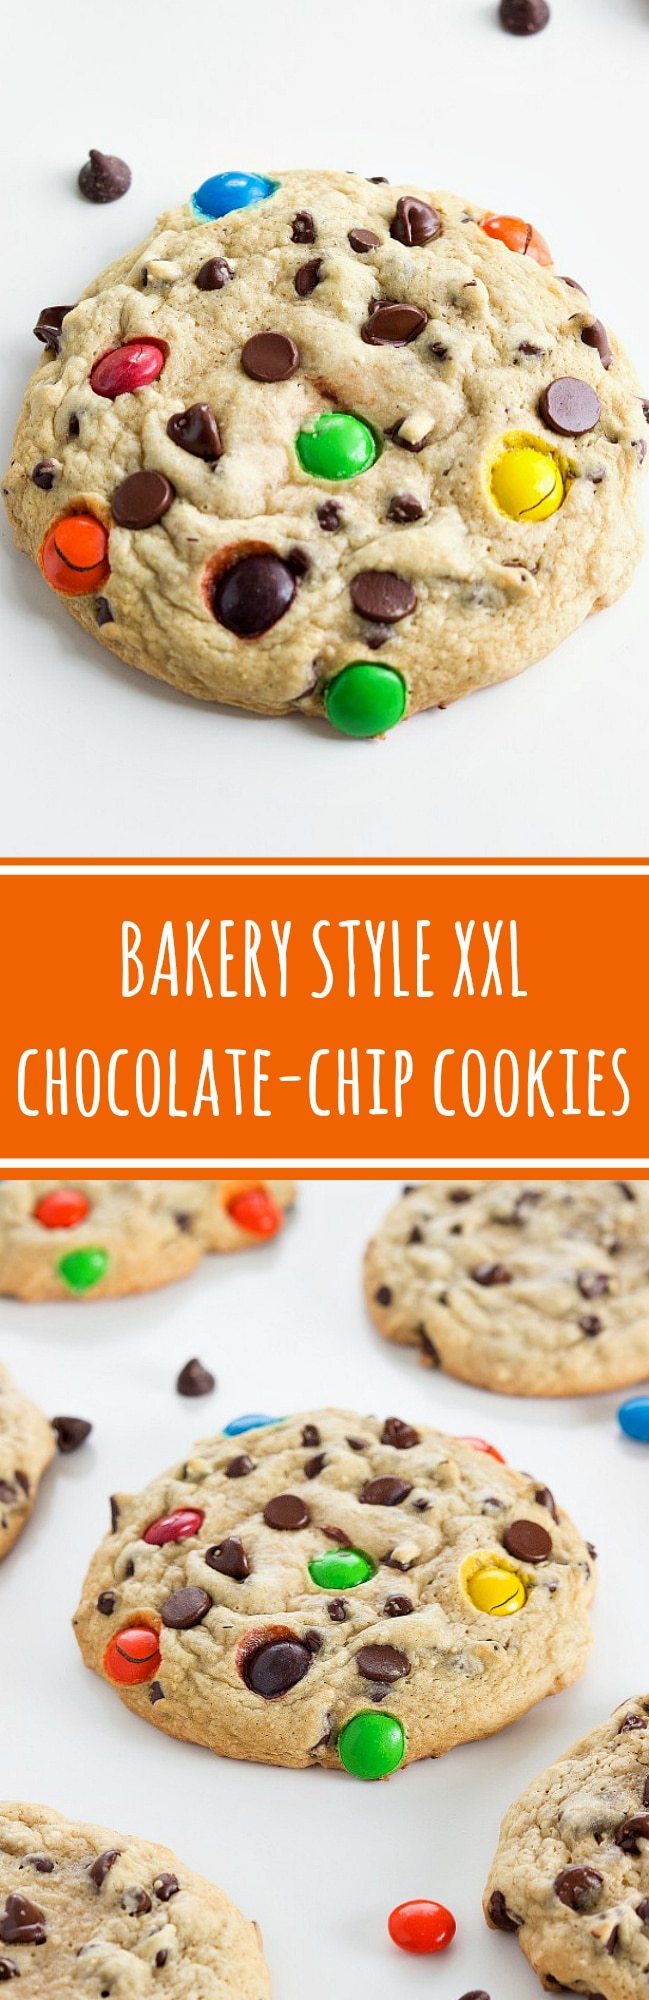 These are tried and true family-favorite chocolate-chip XL bakery style cookies with two secret ingredients, no wonder they are the best! RAVE reviews from commenters